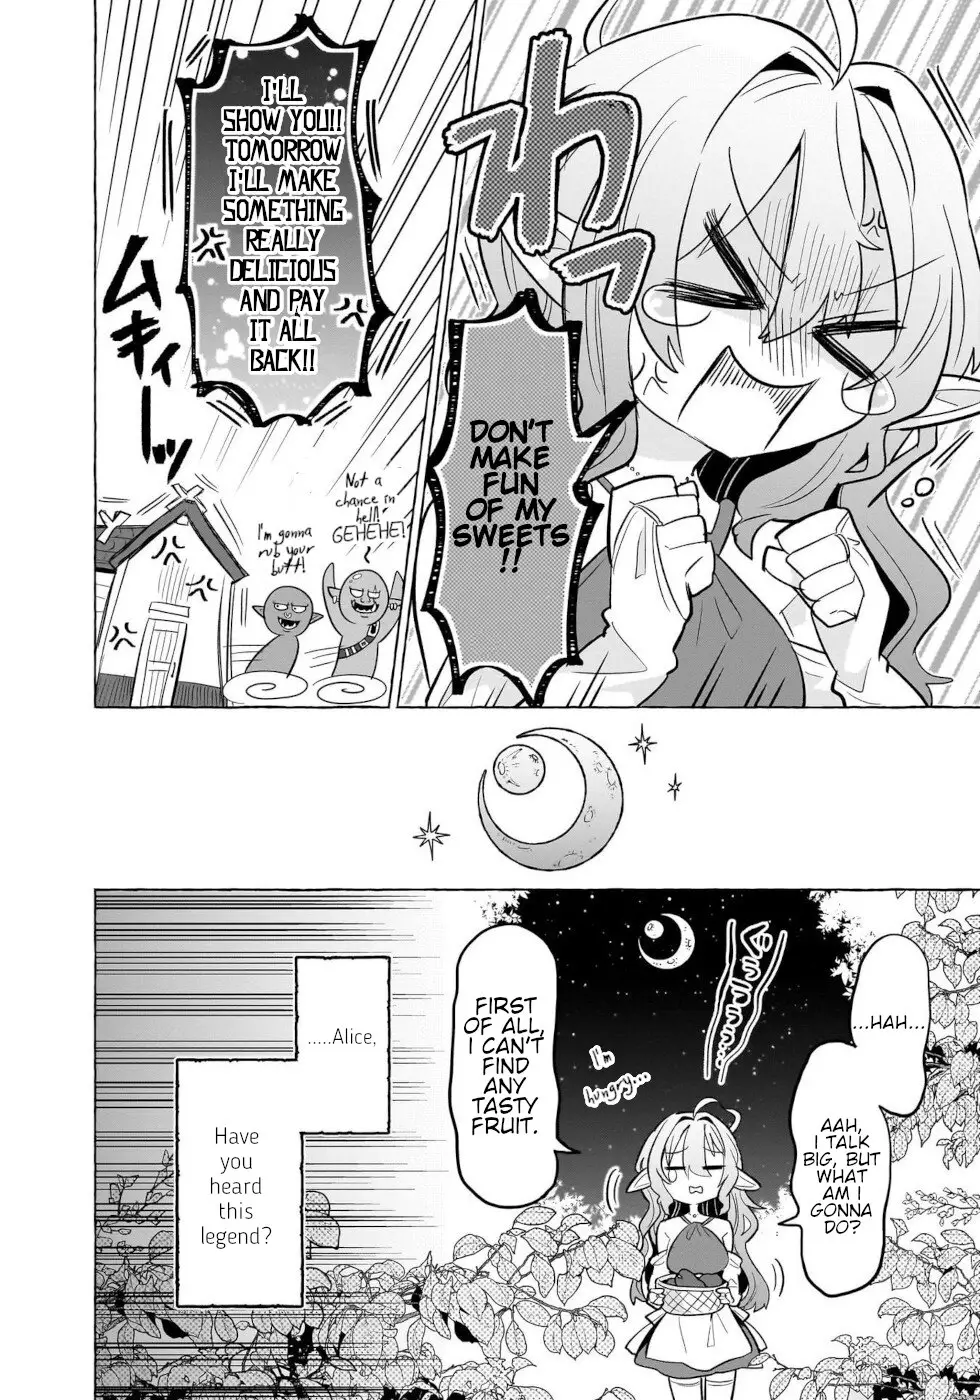 Sweets, Elf, And A High School Girl - 1 page 7-eafc4583